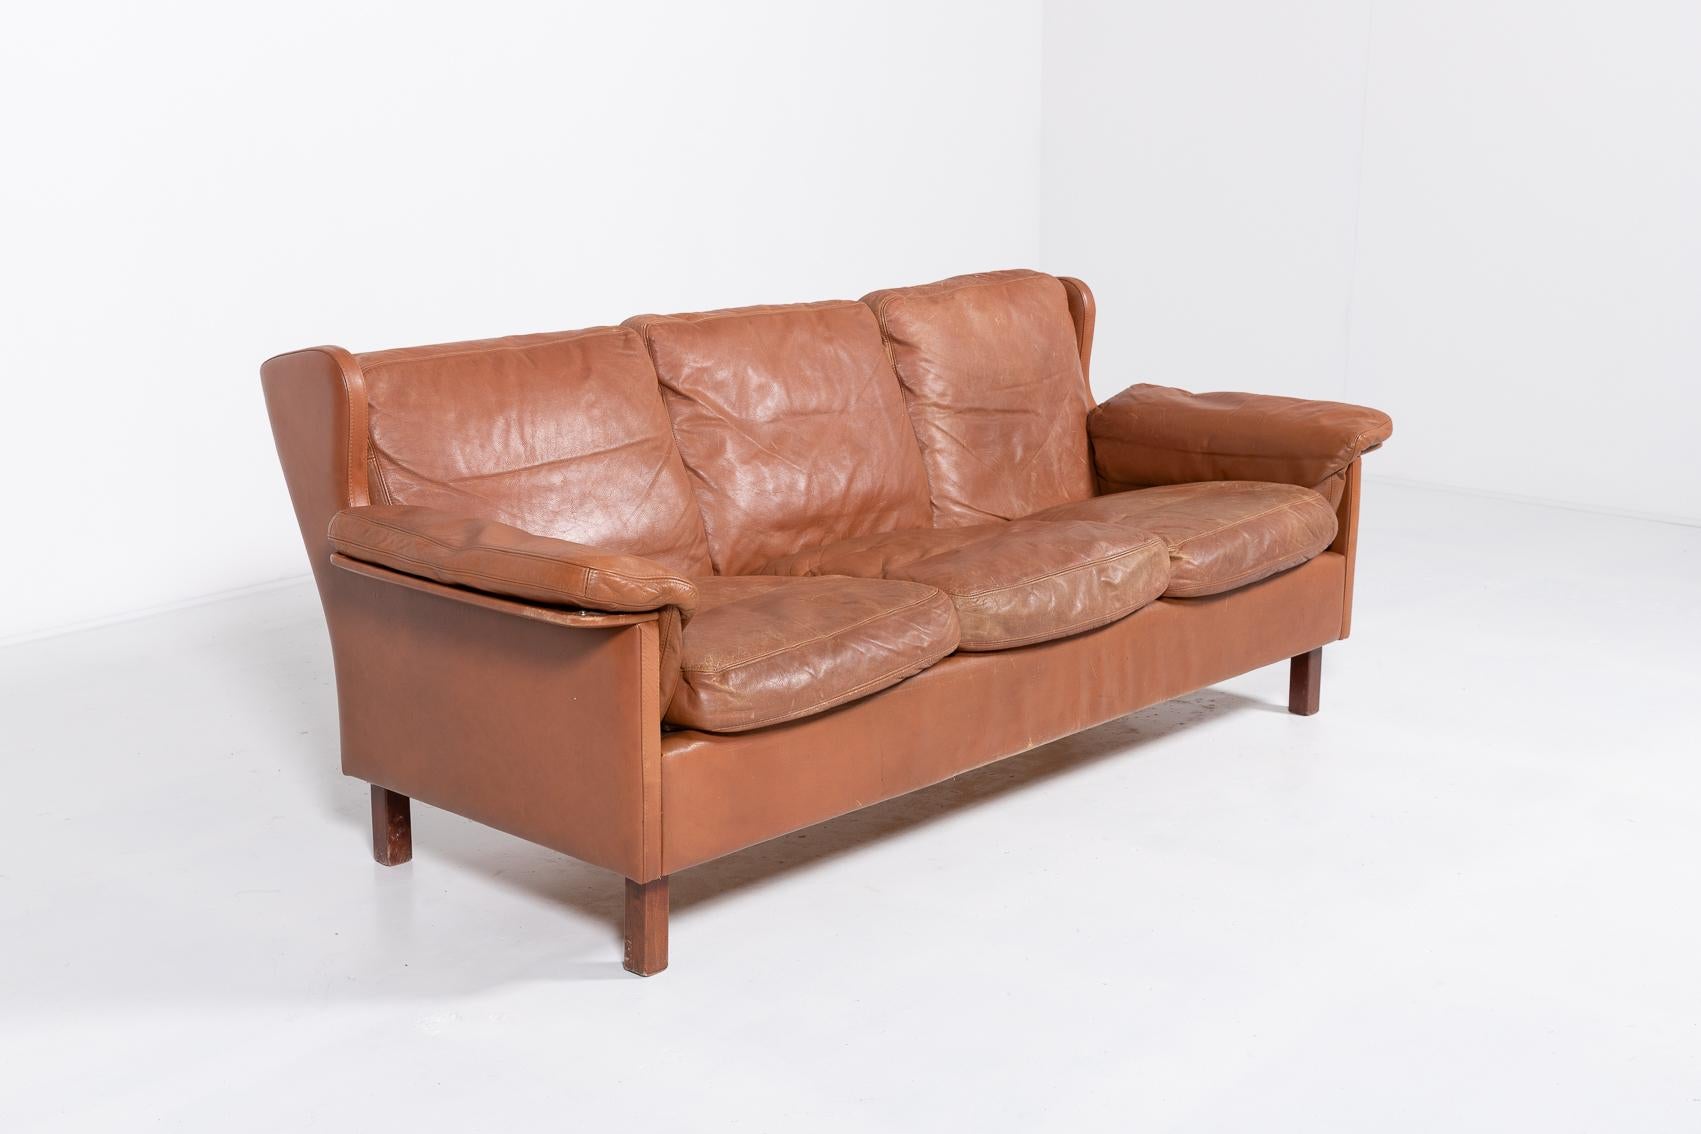 Danish Modern three-seat cognac leather sofa on varnished wood legs, loose cushions. Scandinavian classic style.

Condition
Fair, age related wear and patina.

Dimensions
width: 200 cm
depth: 80 cm
height: 78 cm
seat height: 44 cm